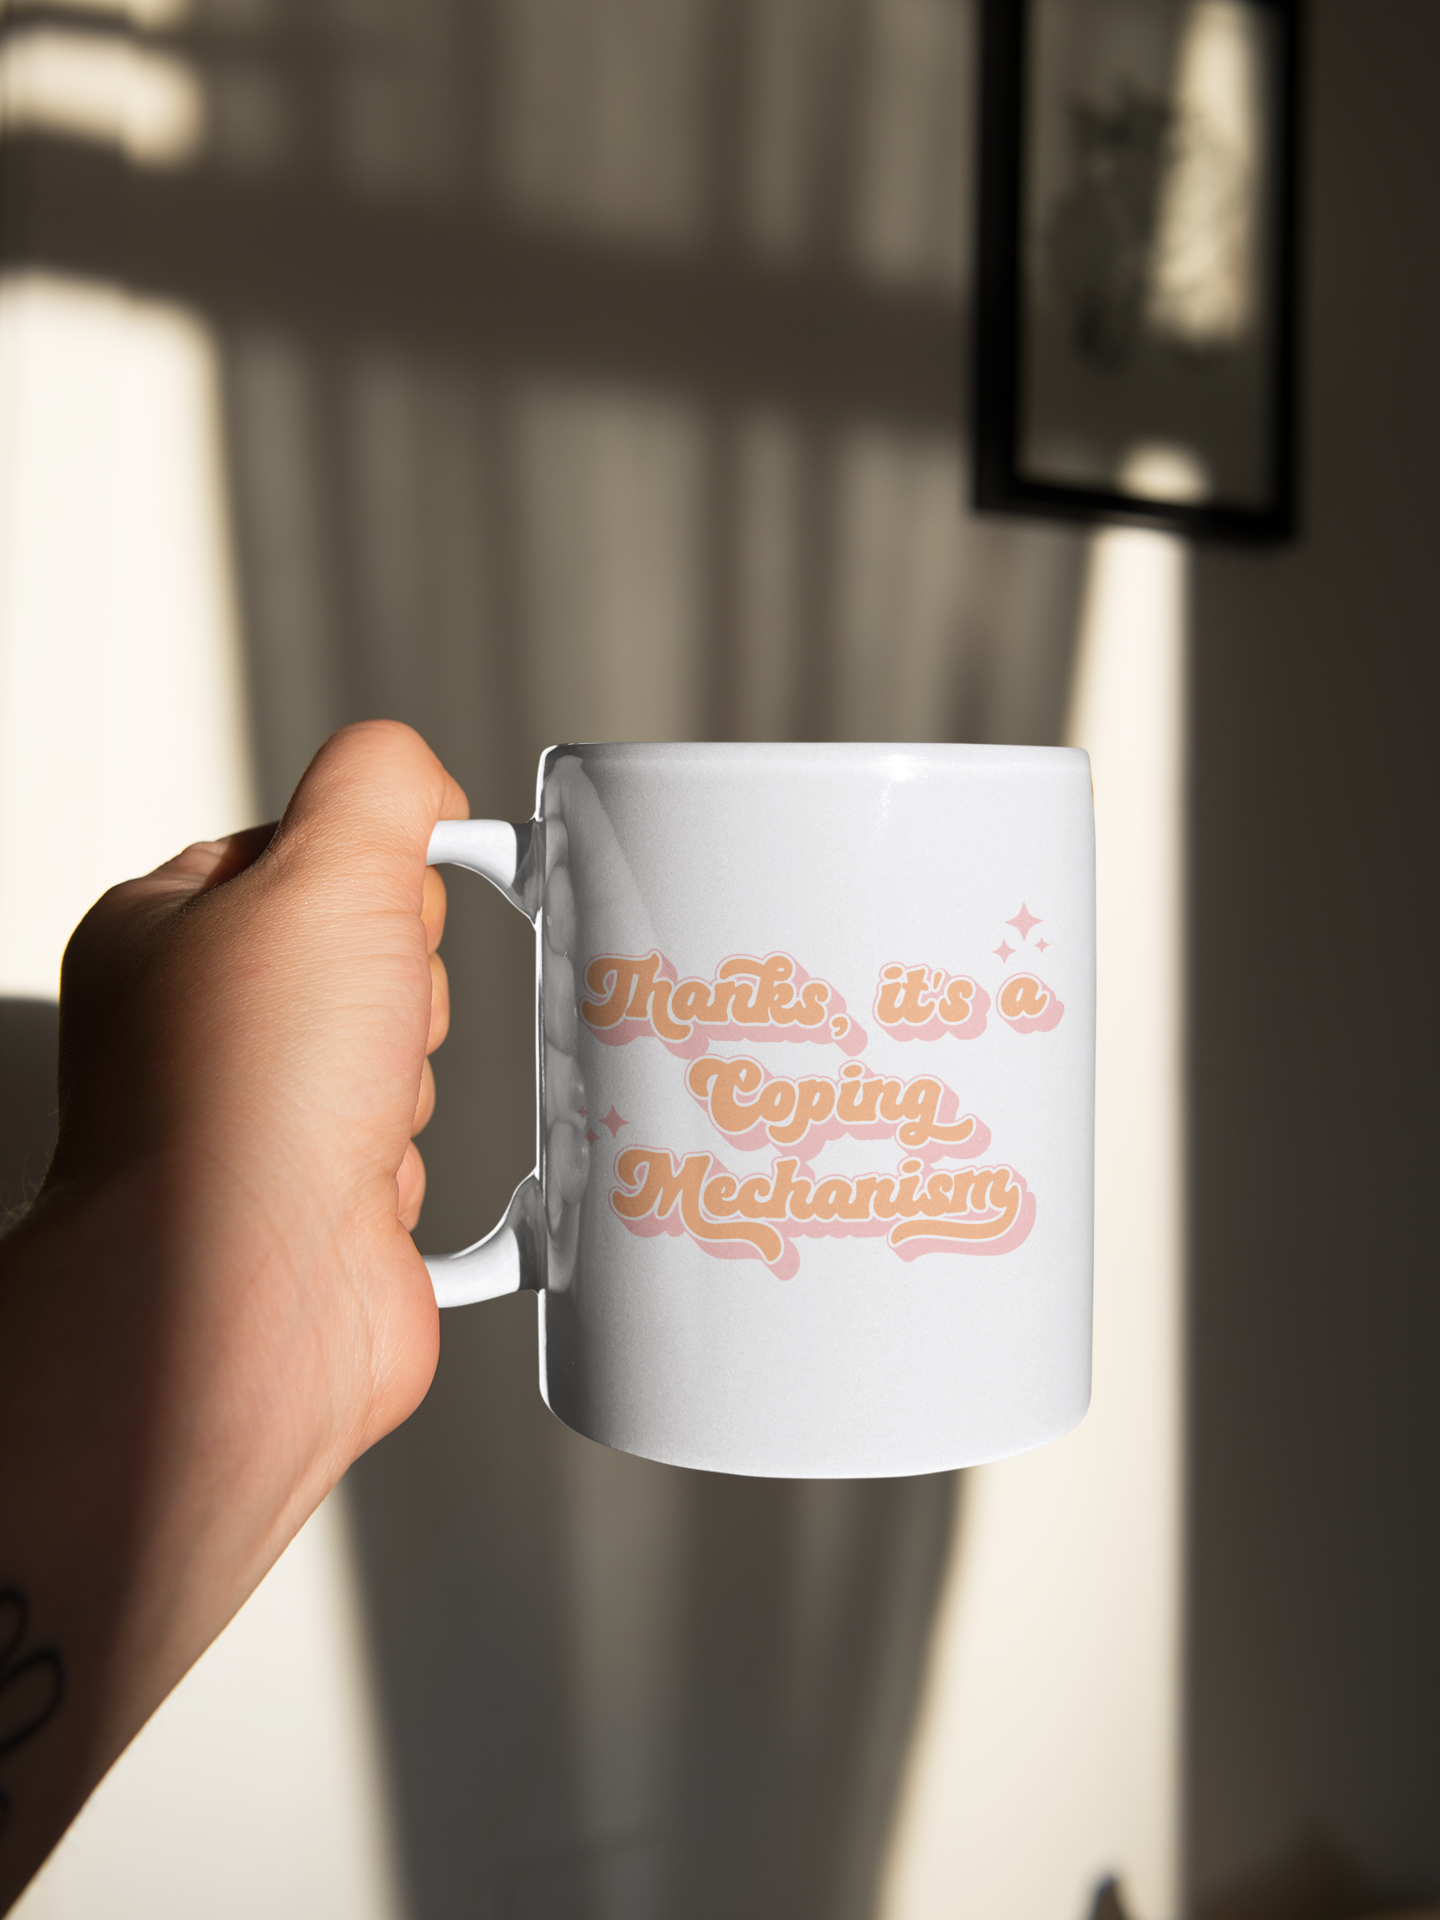 “Thanks, it’s a coping mechanism “ Mug - Bad Perfectionist Co.